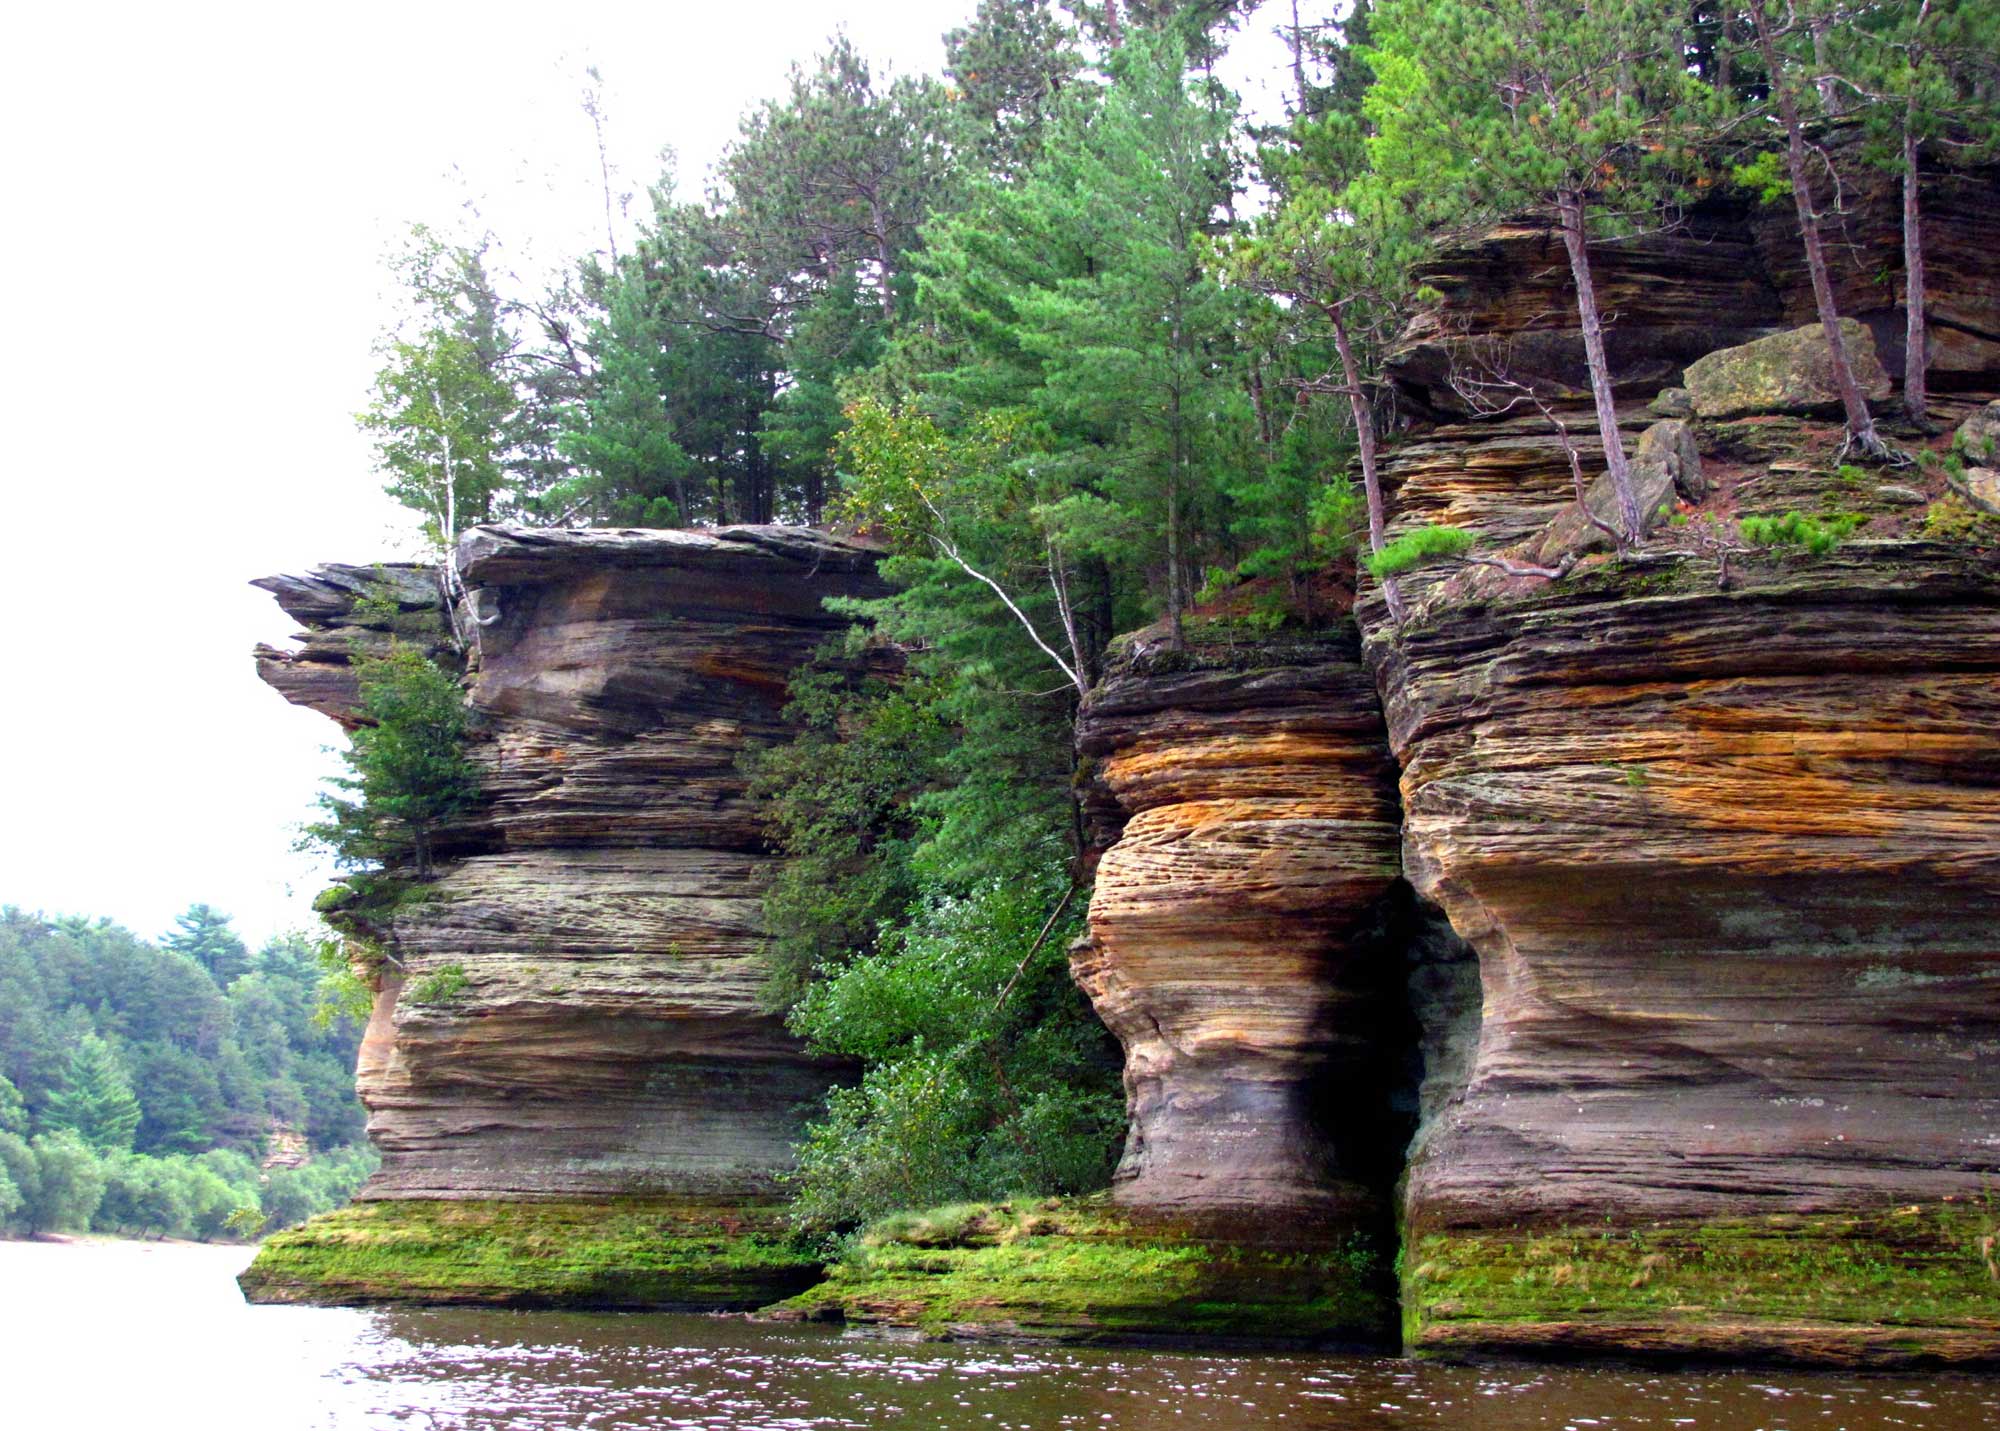 Photograph of the Wisconsin Dells. The photo shows rounded sandstone cliffs with water at their base. Trees are growing between and on top of the cliffs.